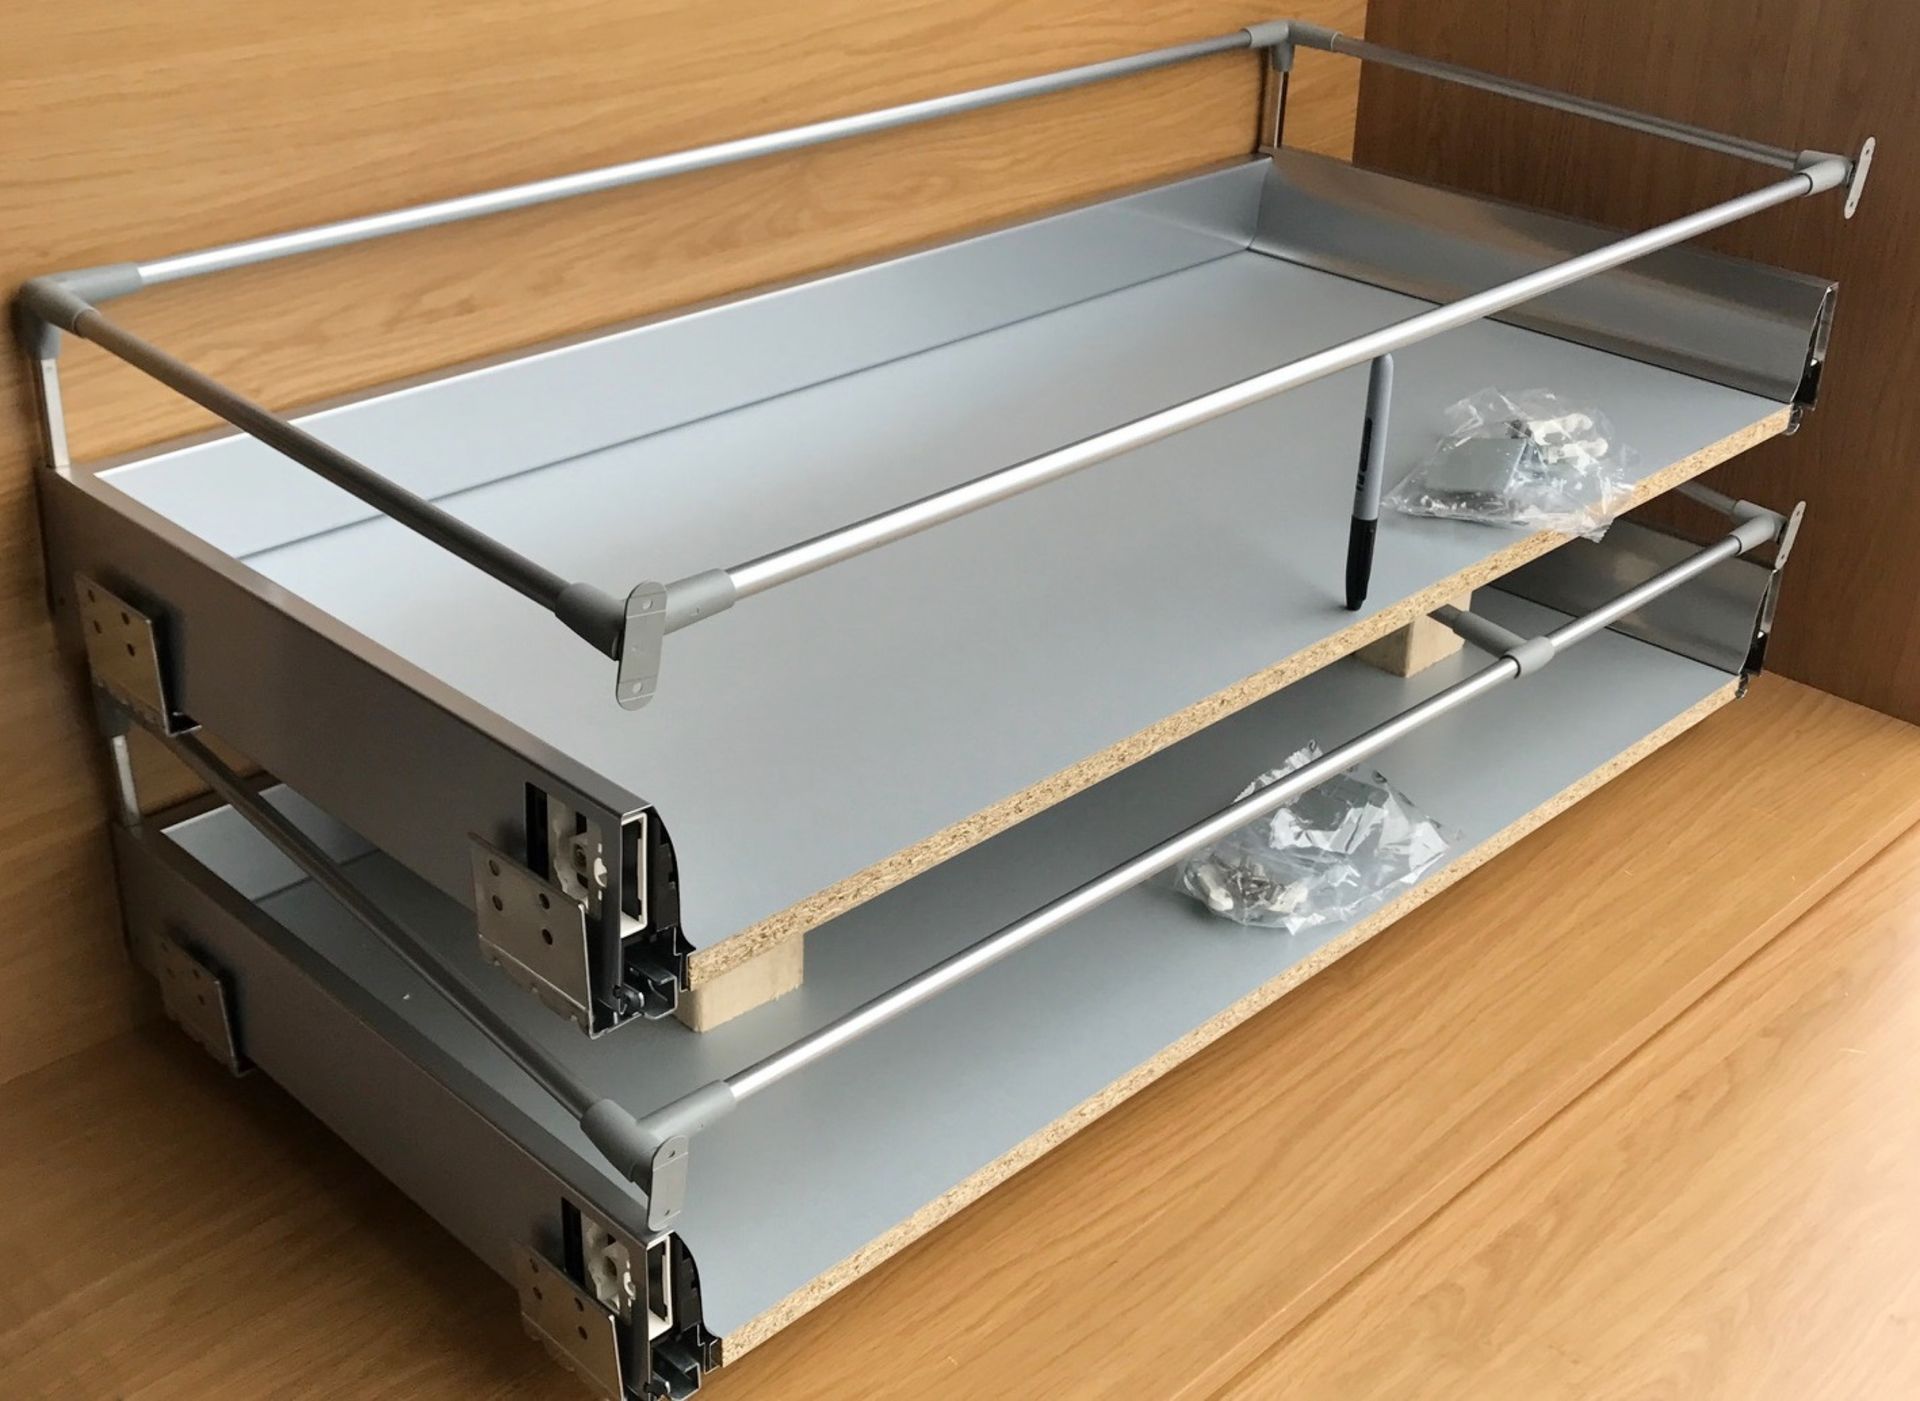 3 x 1000mm Soft Close Kitchen Drawer Packs - B&Q Prestige - Brand New Stock - Features Include Metal